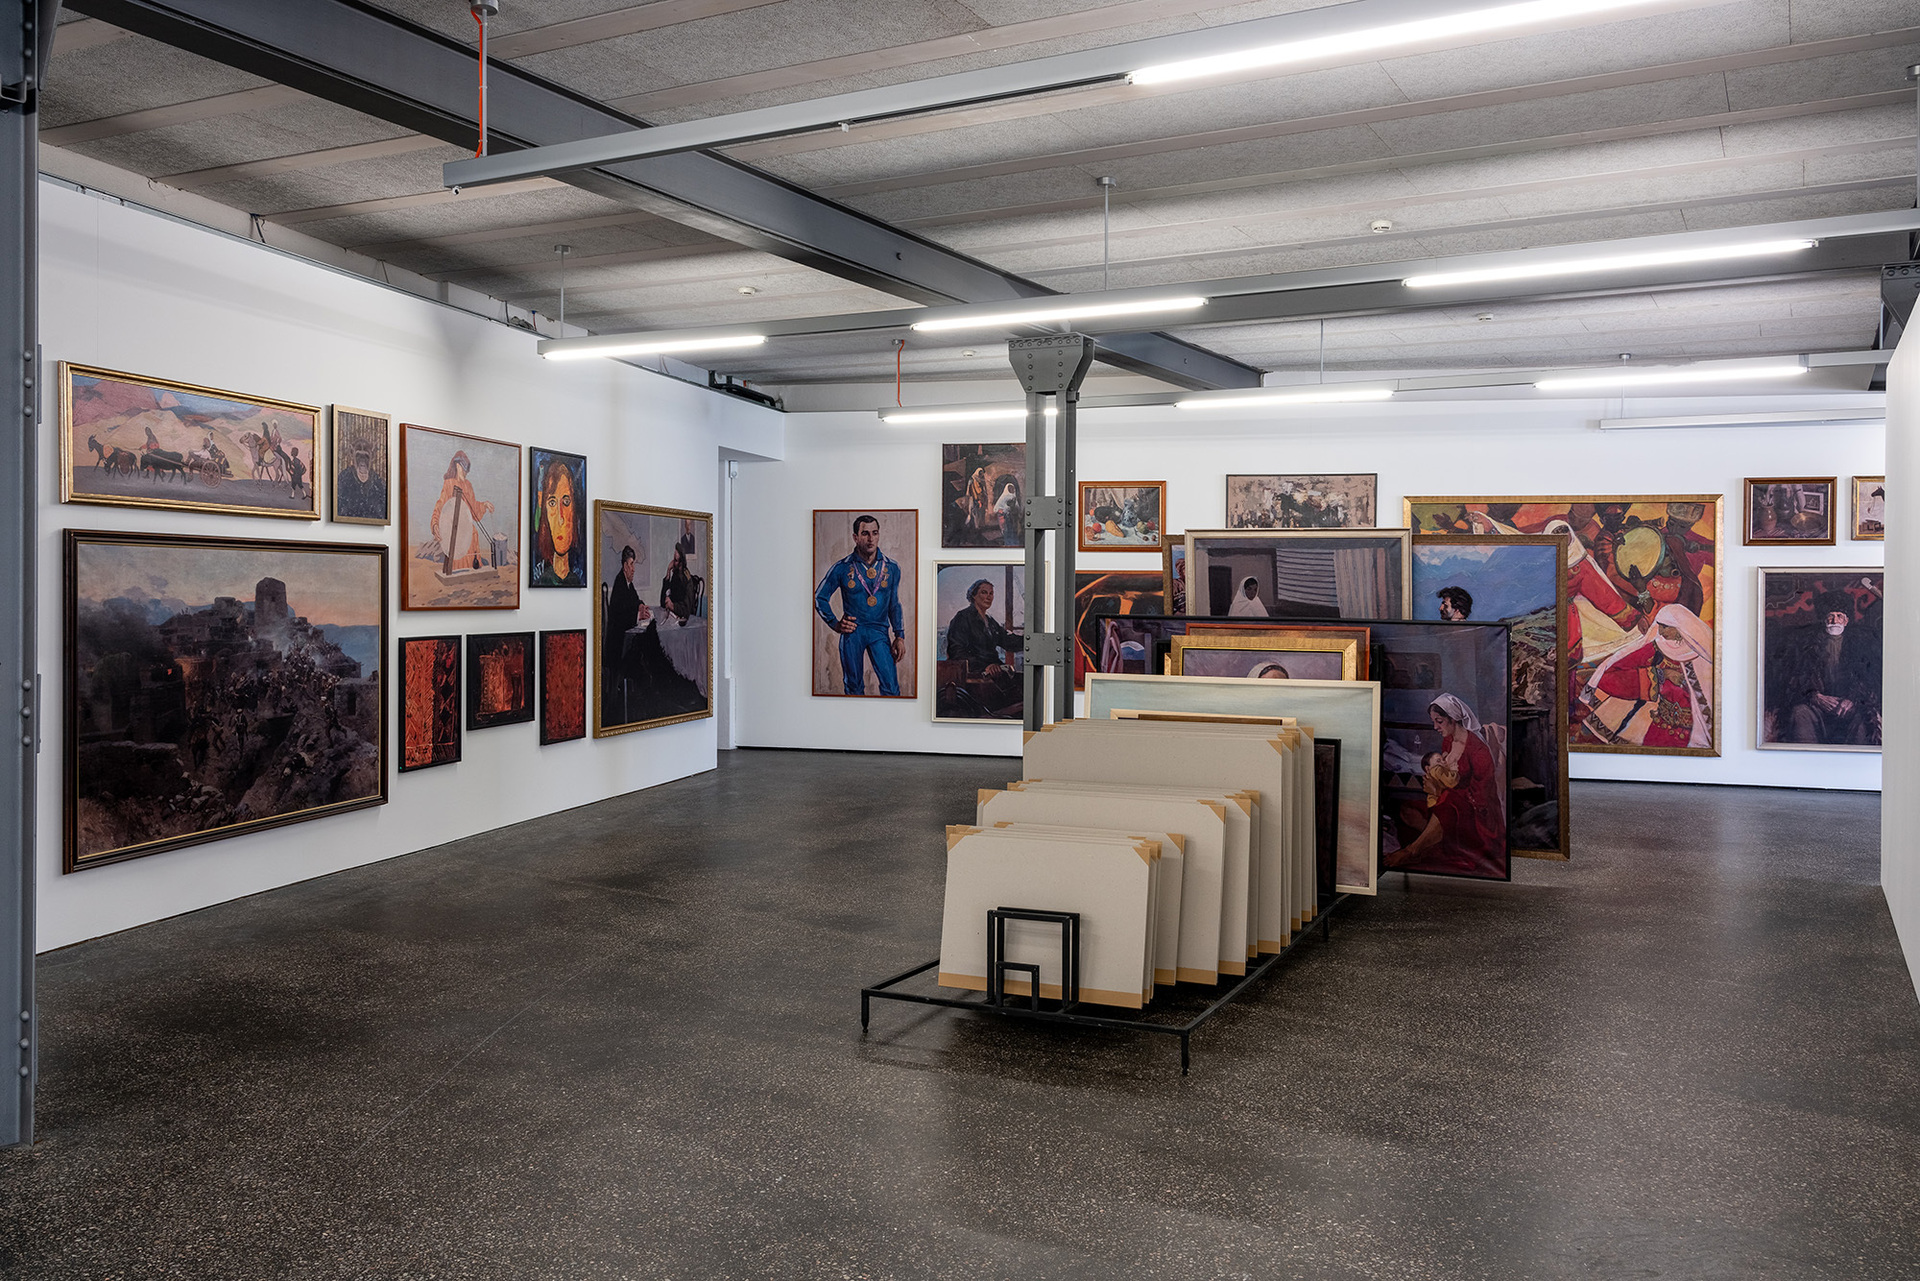 Taus Makhacheva, Selection of works from Dagestan Museum of Fine Arts named after P.S. Gamzatova, Makhachkala (2015), installation view, Alte Fabrik, Rapperswil (CH) 2020. Collection Van Abbemuseum, Eindhoven and MUHKA — Museum of Contemporary Art Antwerp. Photo: Niklas Goldbach